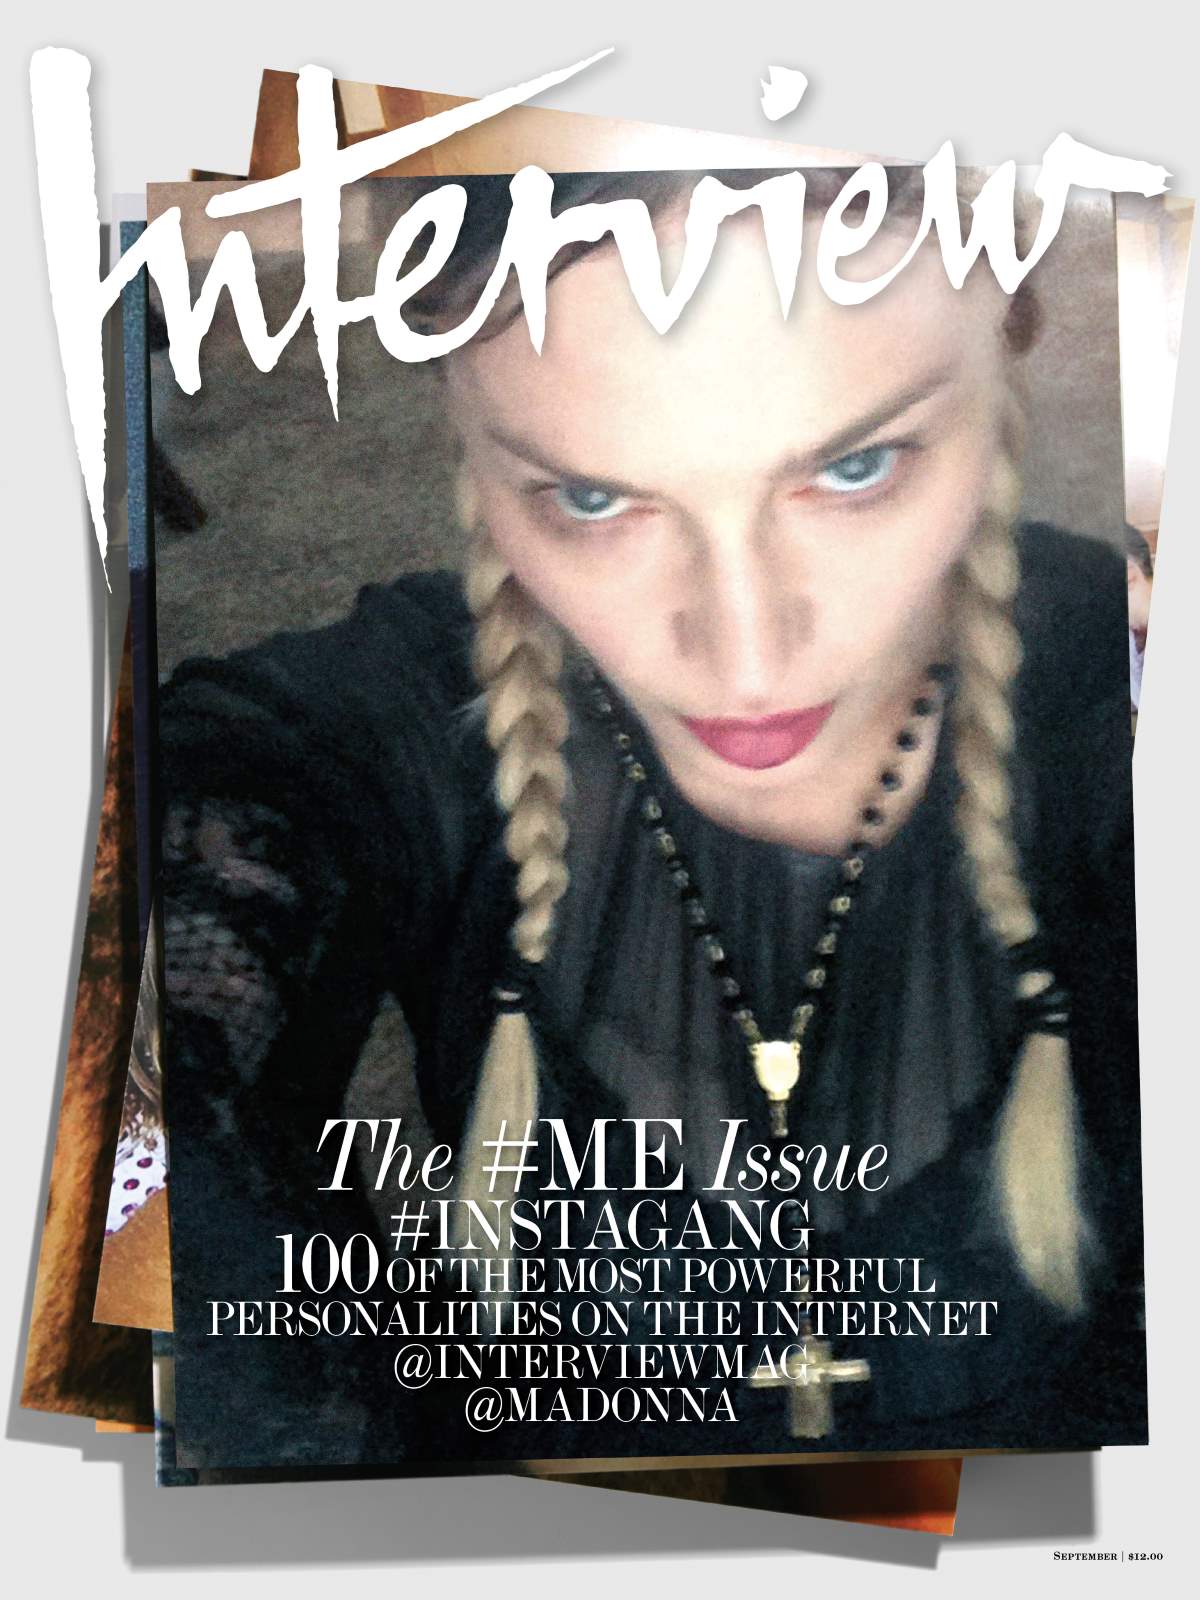 Madonna on the #ME issue of Interview